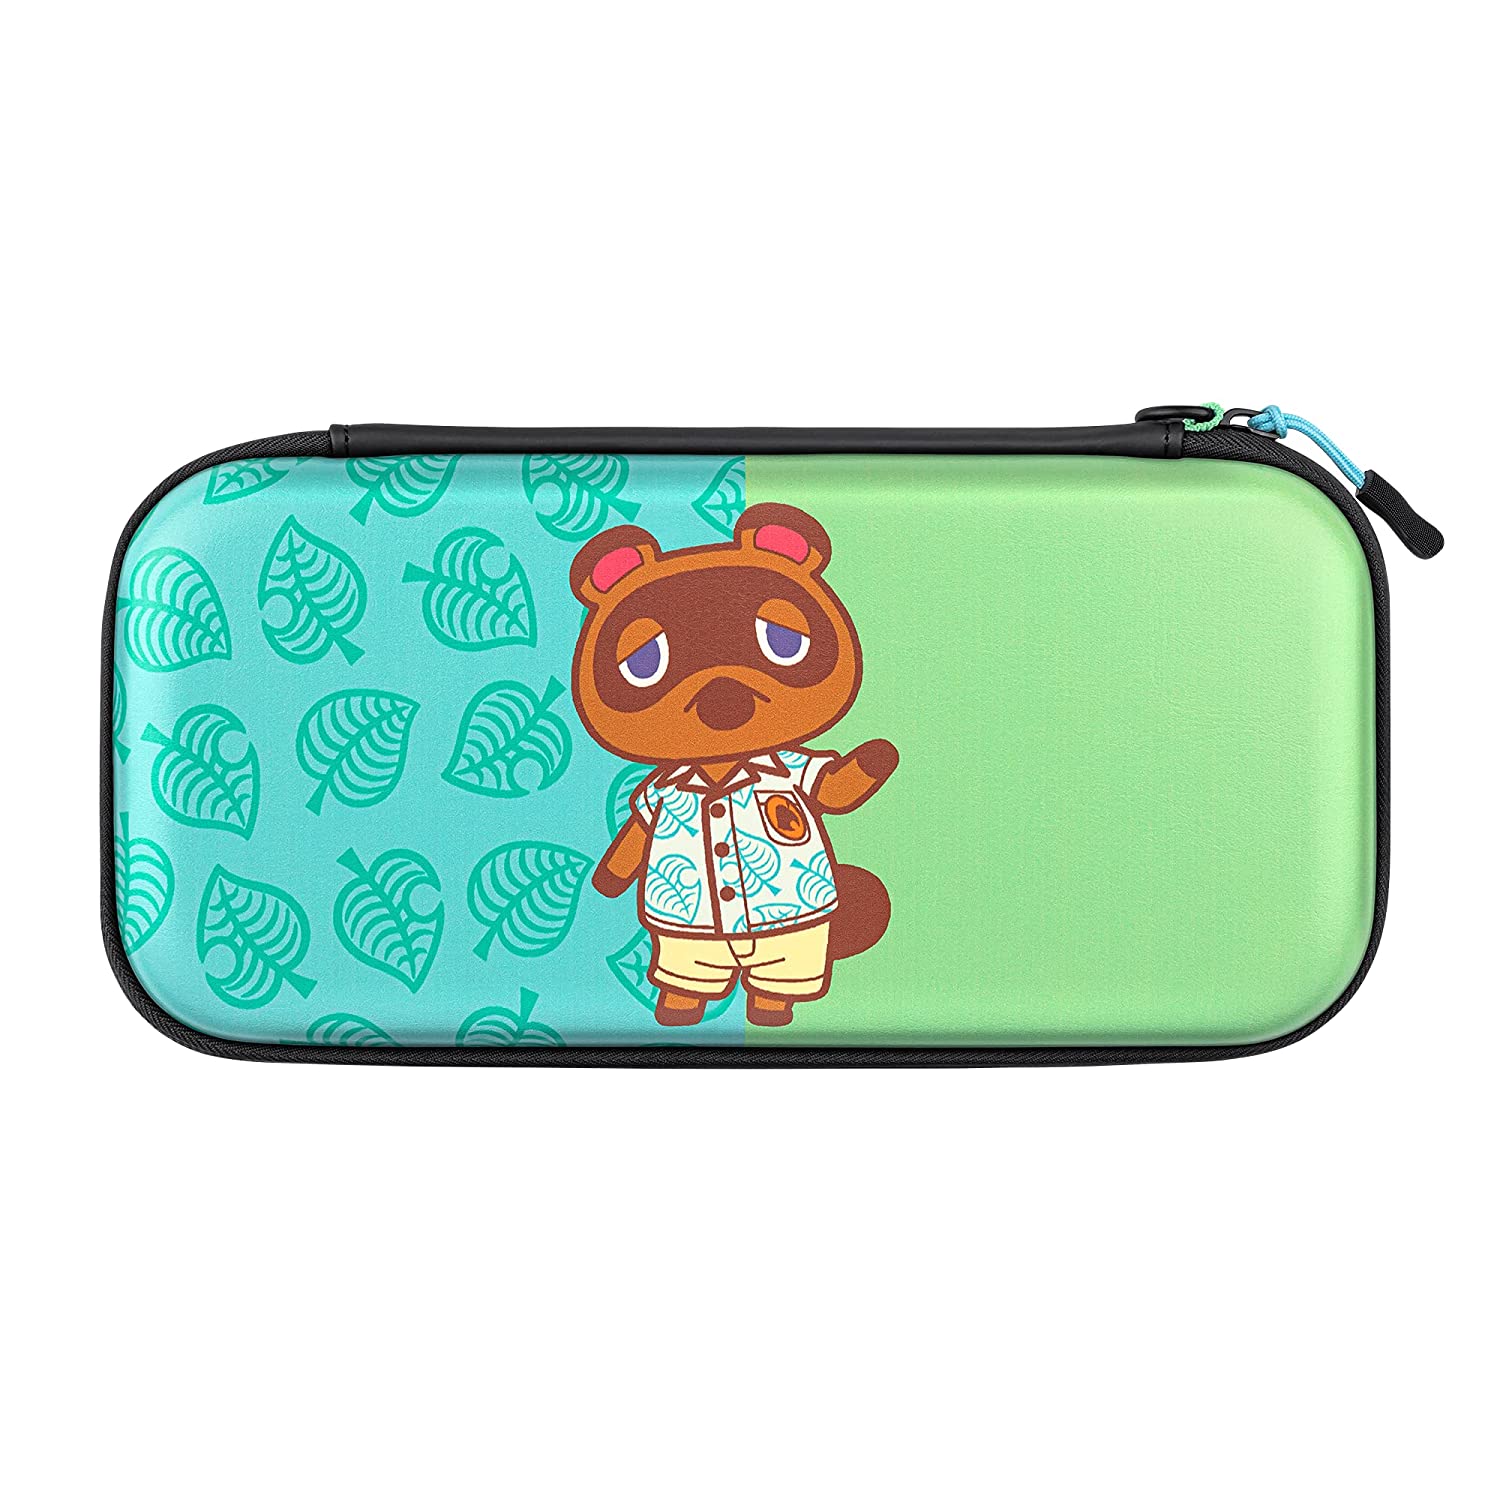 switch Dlx travel case – Animal crossing edition